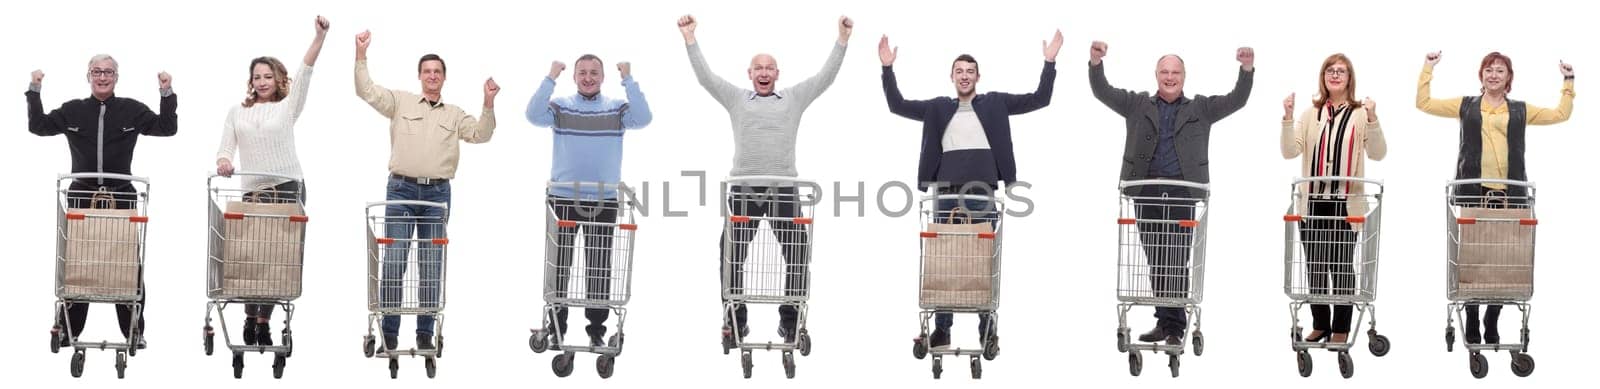 group of people with cart raised their hands up by asdf